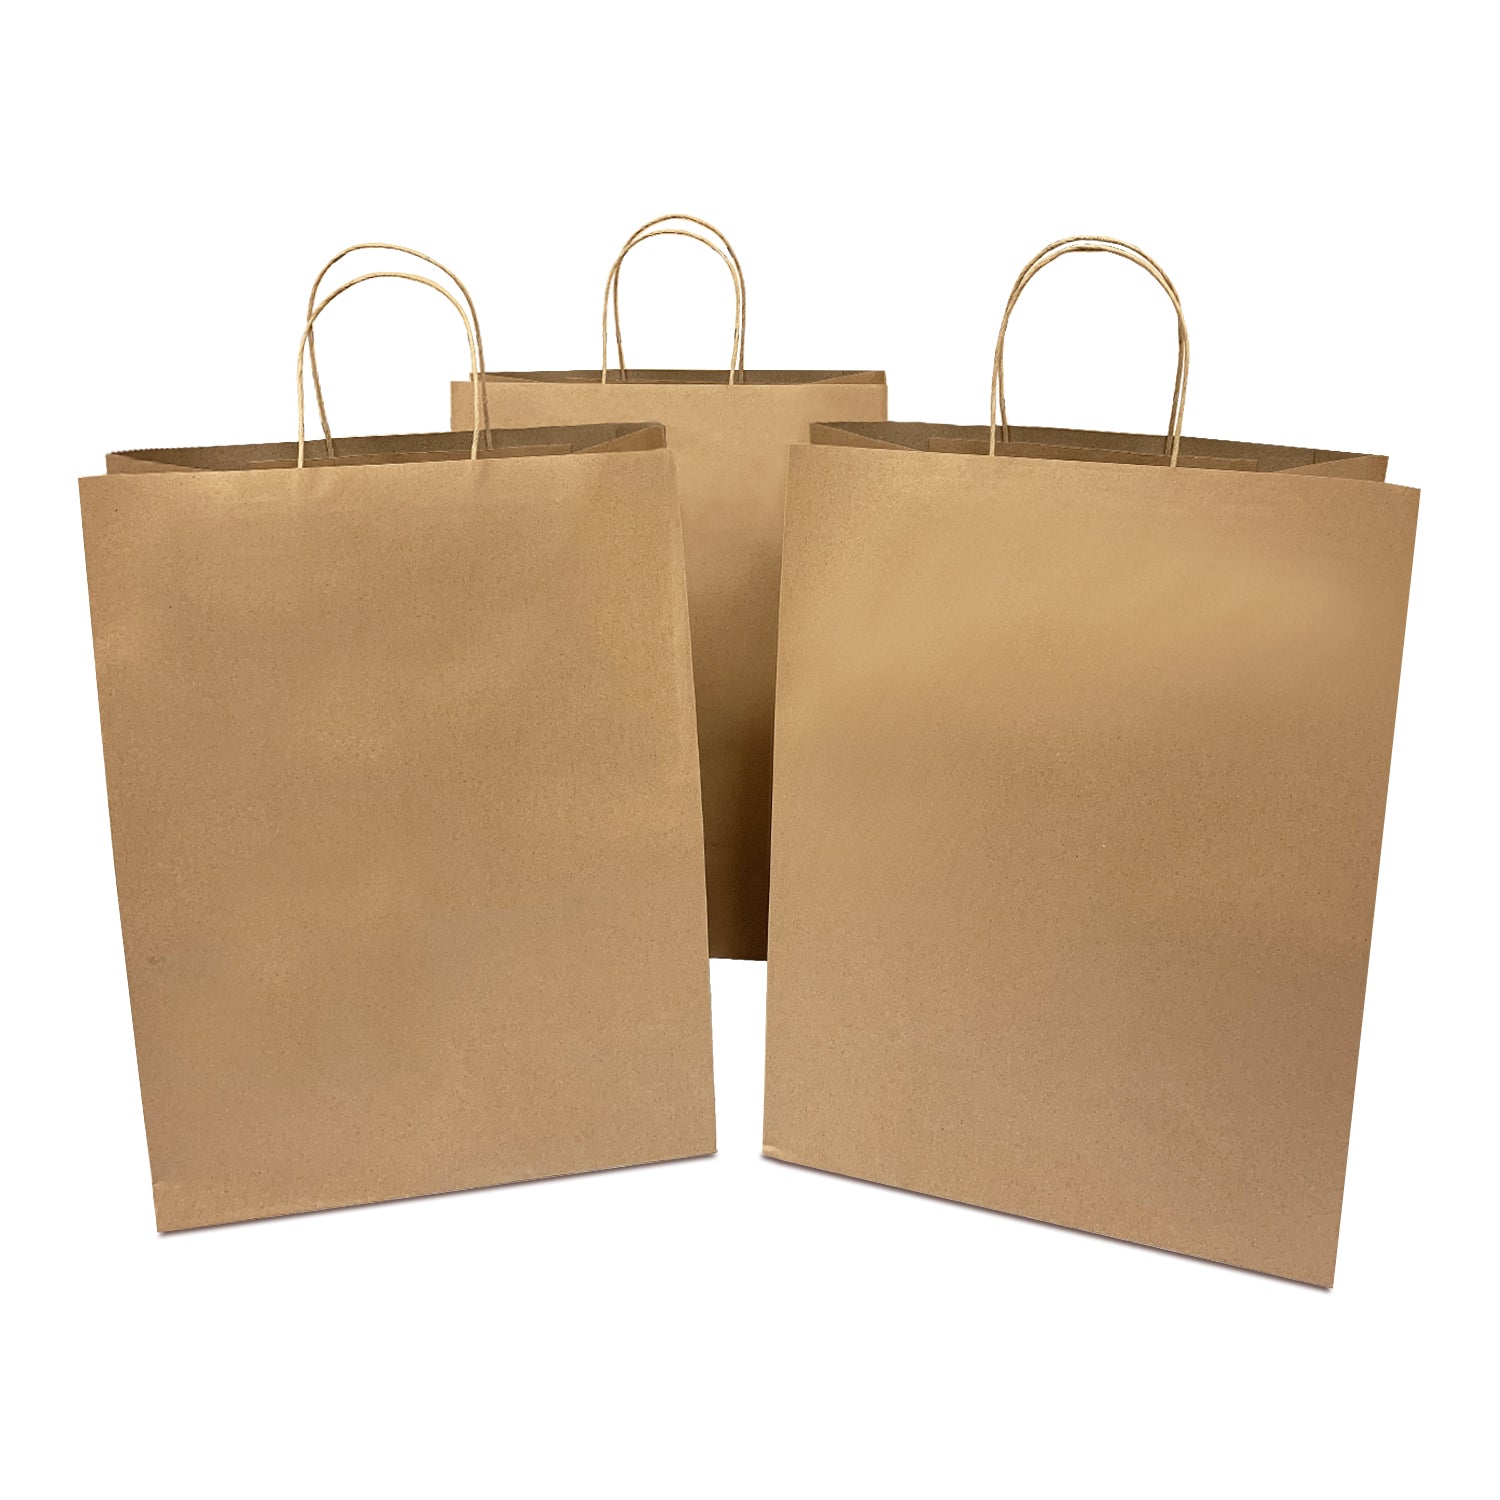 250 Pcs, Mart, 13x6.7x17 inches, Kraft Paper Bags, with Twisted Handle